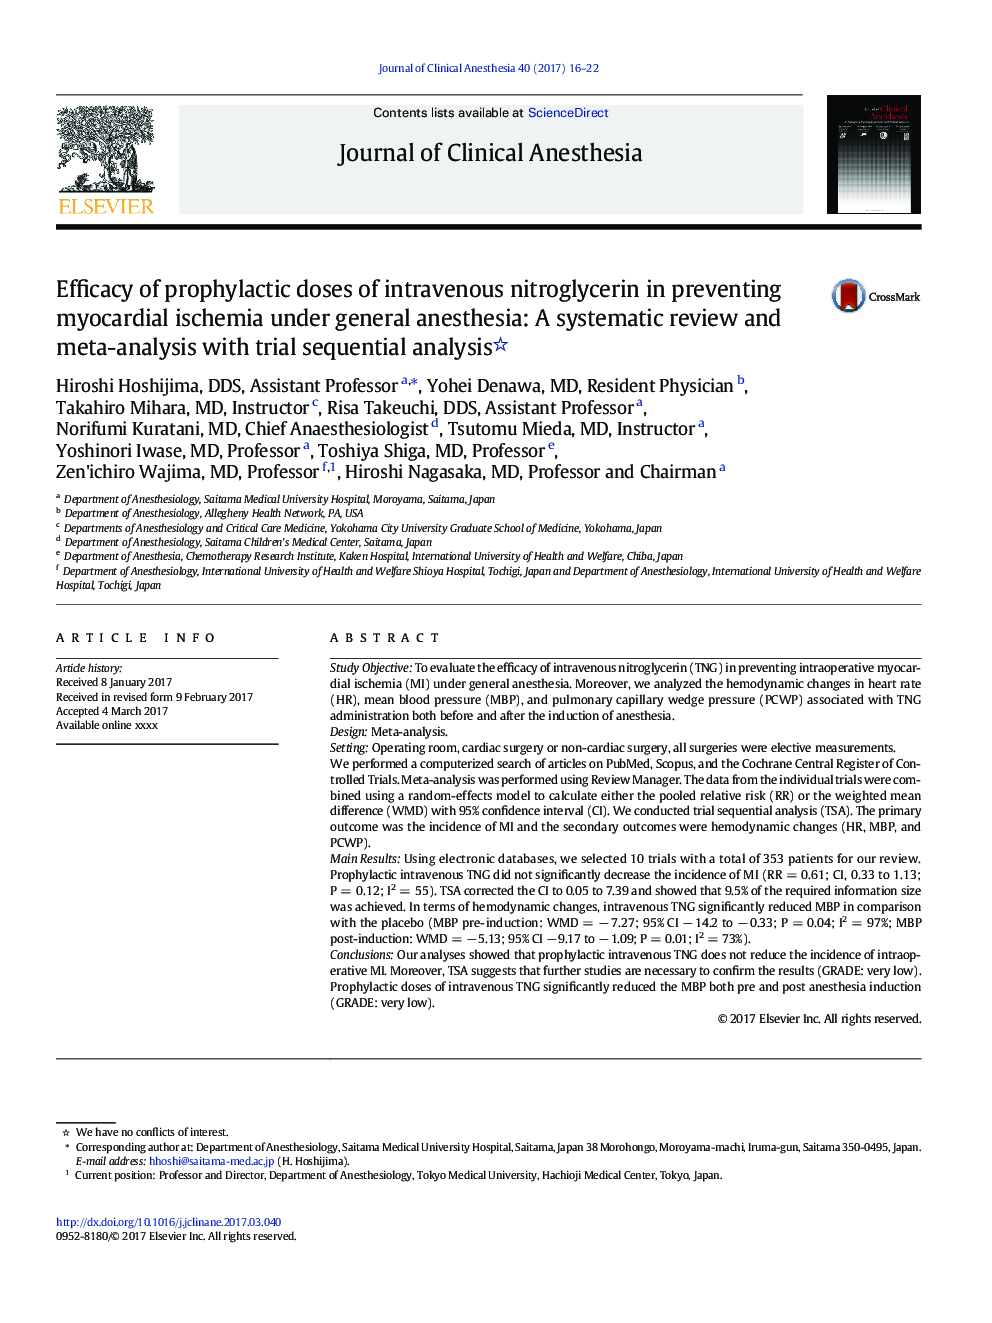 Efficacy of prophylactic doses of intravenous nitroglycerin in preventing myocardial ischemia under general anesthesia: A systematic review and meta-analysis with trial sequential analysis